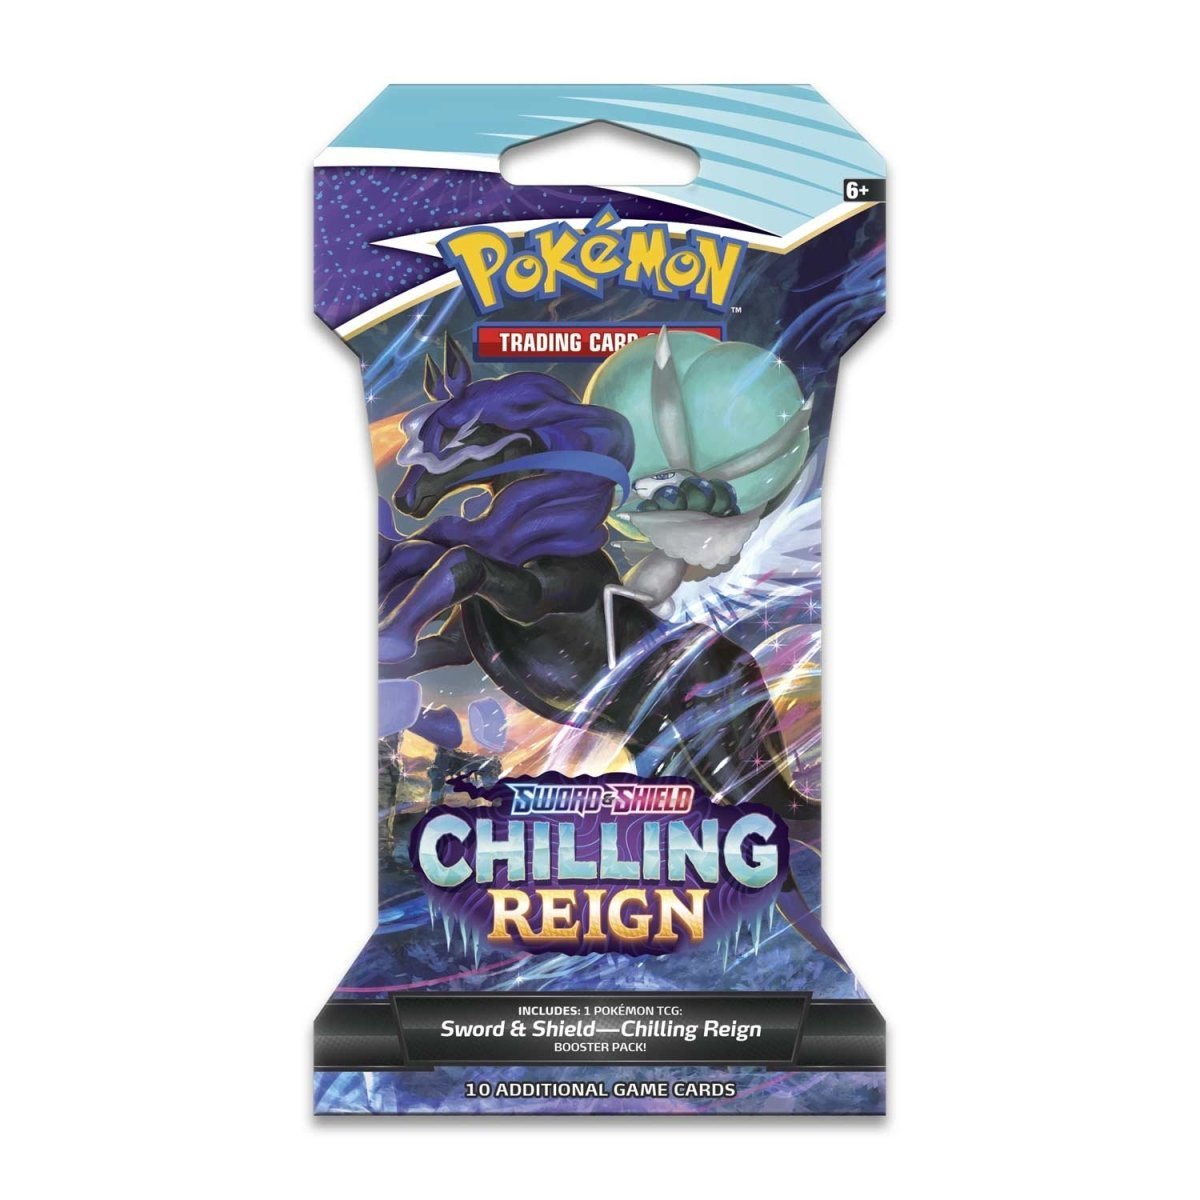 Pokémon: Sword & Shield - Chilling Reign Sleeved Booster Pack - PokeRvmbooster pack